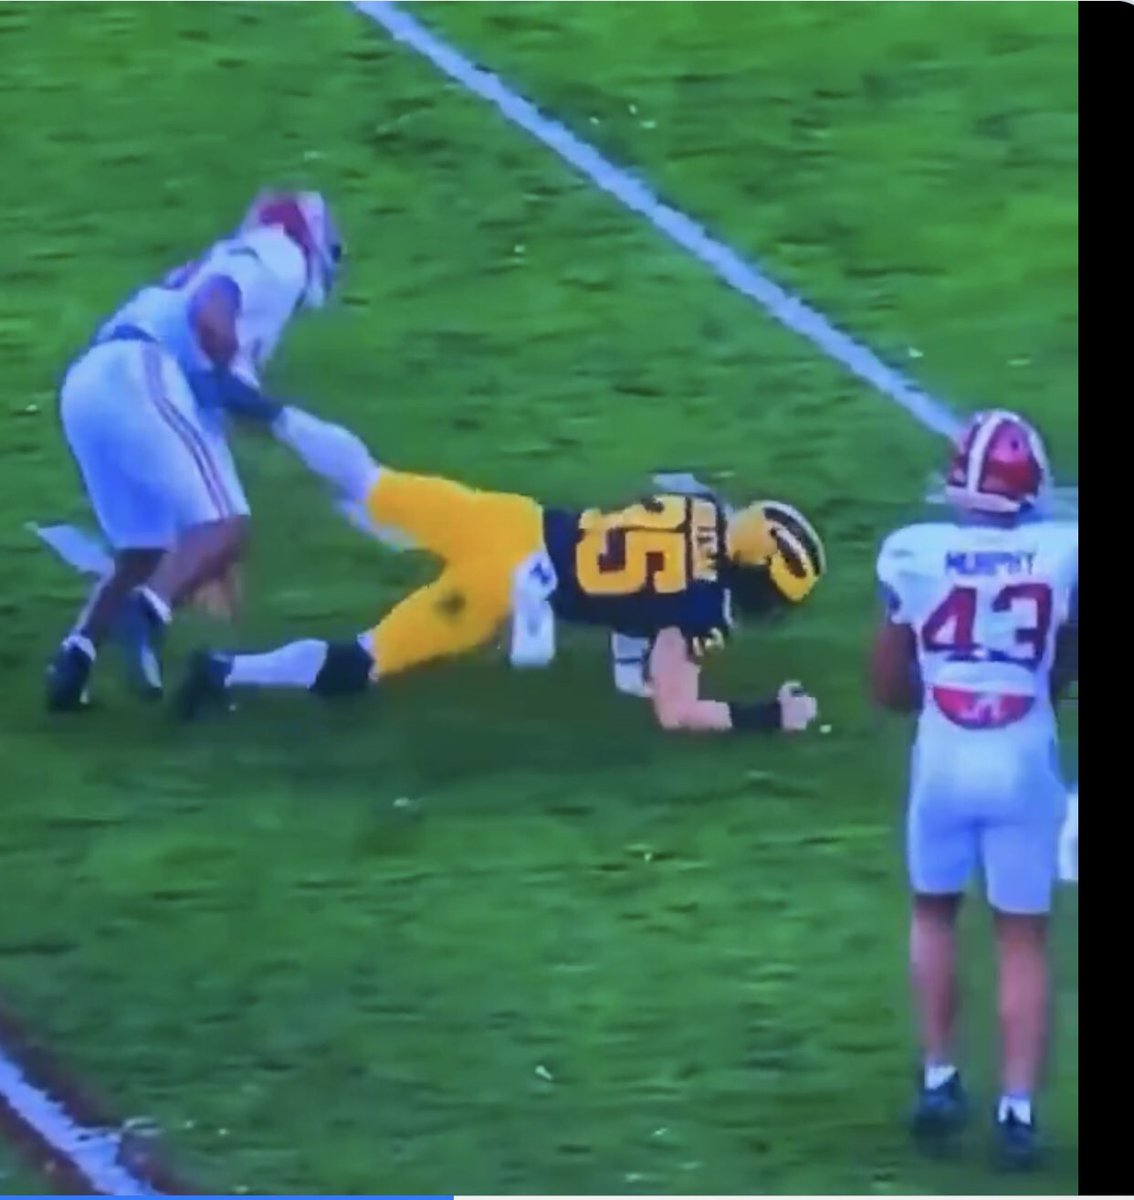 This is POS program up north! No flag for running into kicker or for hitting players after tackle. Dirty cheating Bastards! #AlabamaFootball #Alabama #MichiganFootball #Michigan #Cheaters #dirtyplay